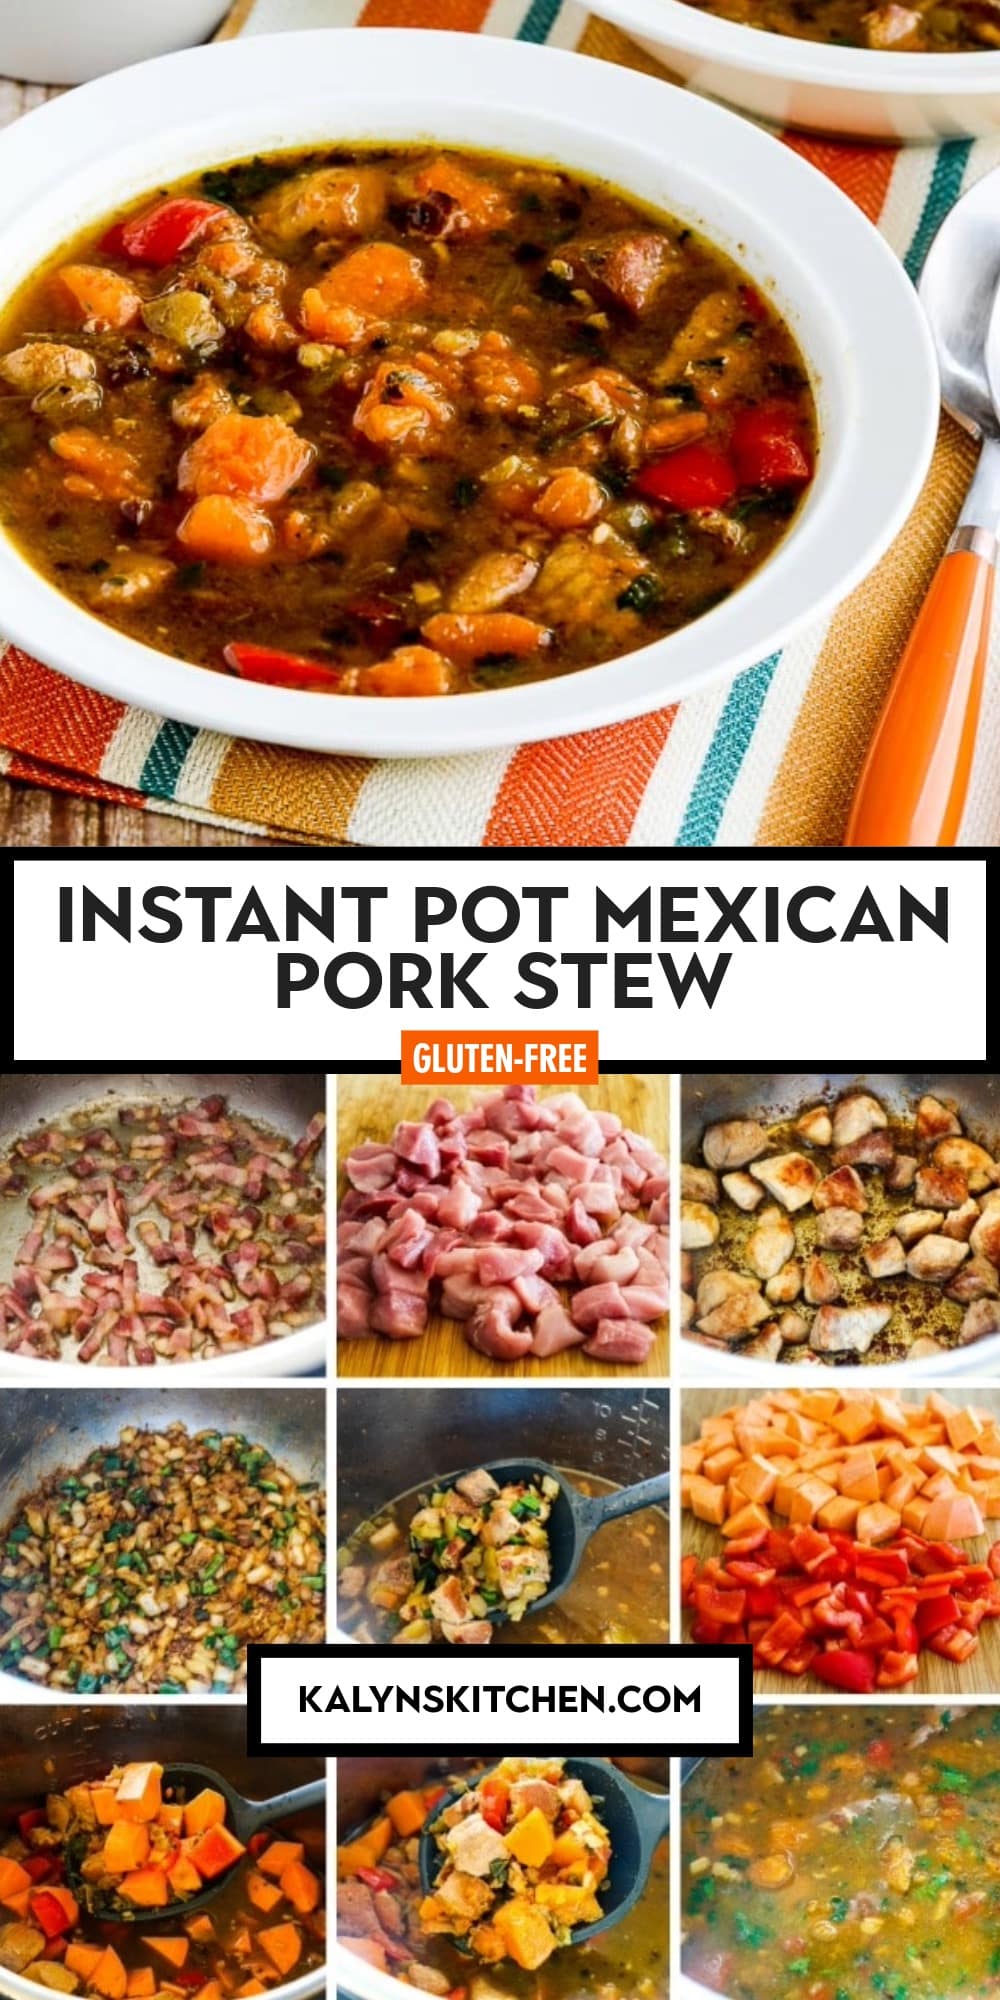 Pinterest image of Instant Pot Mexican Pork Stew